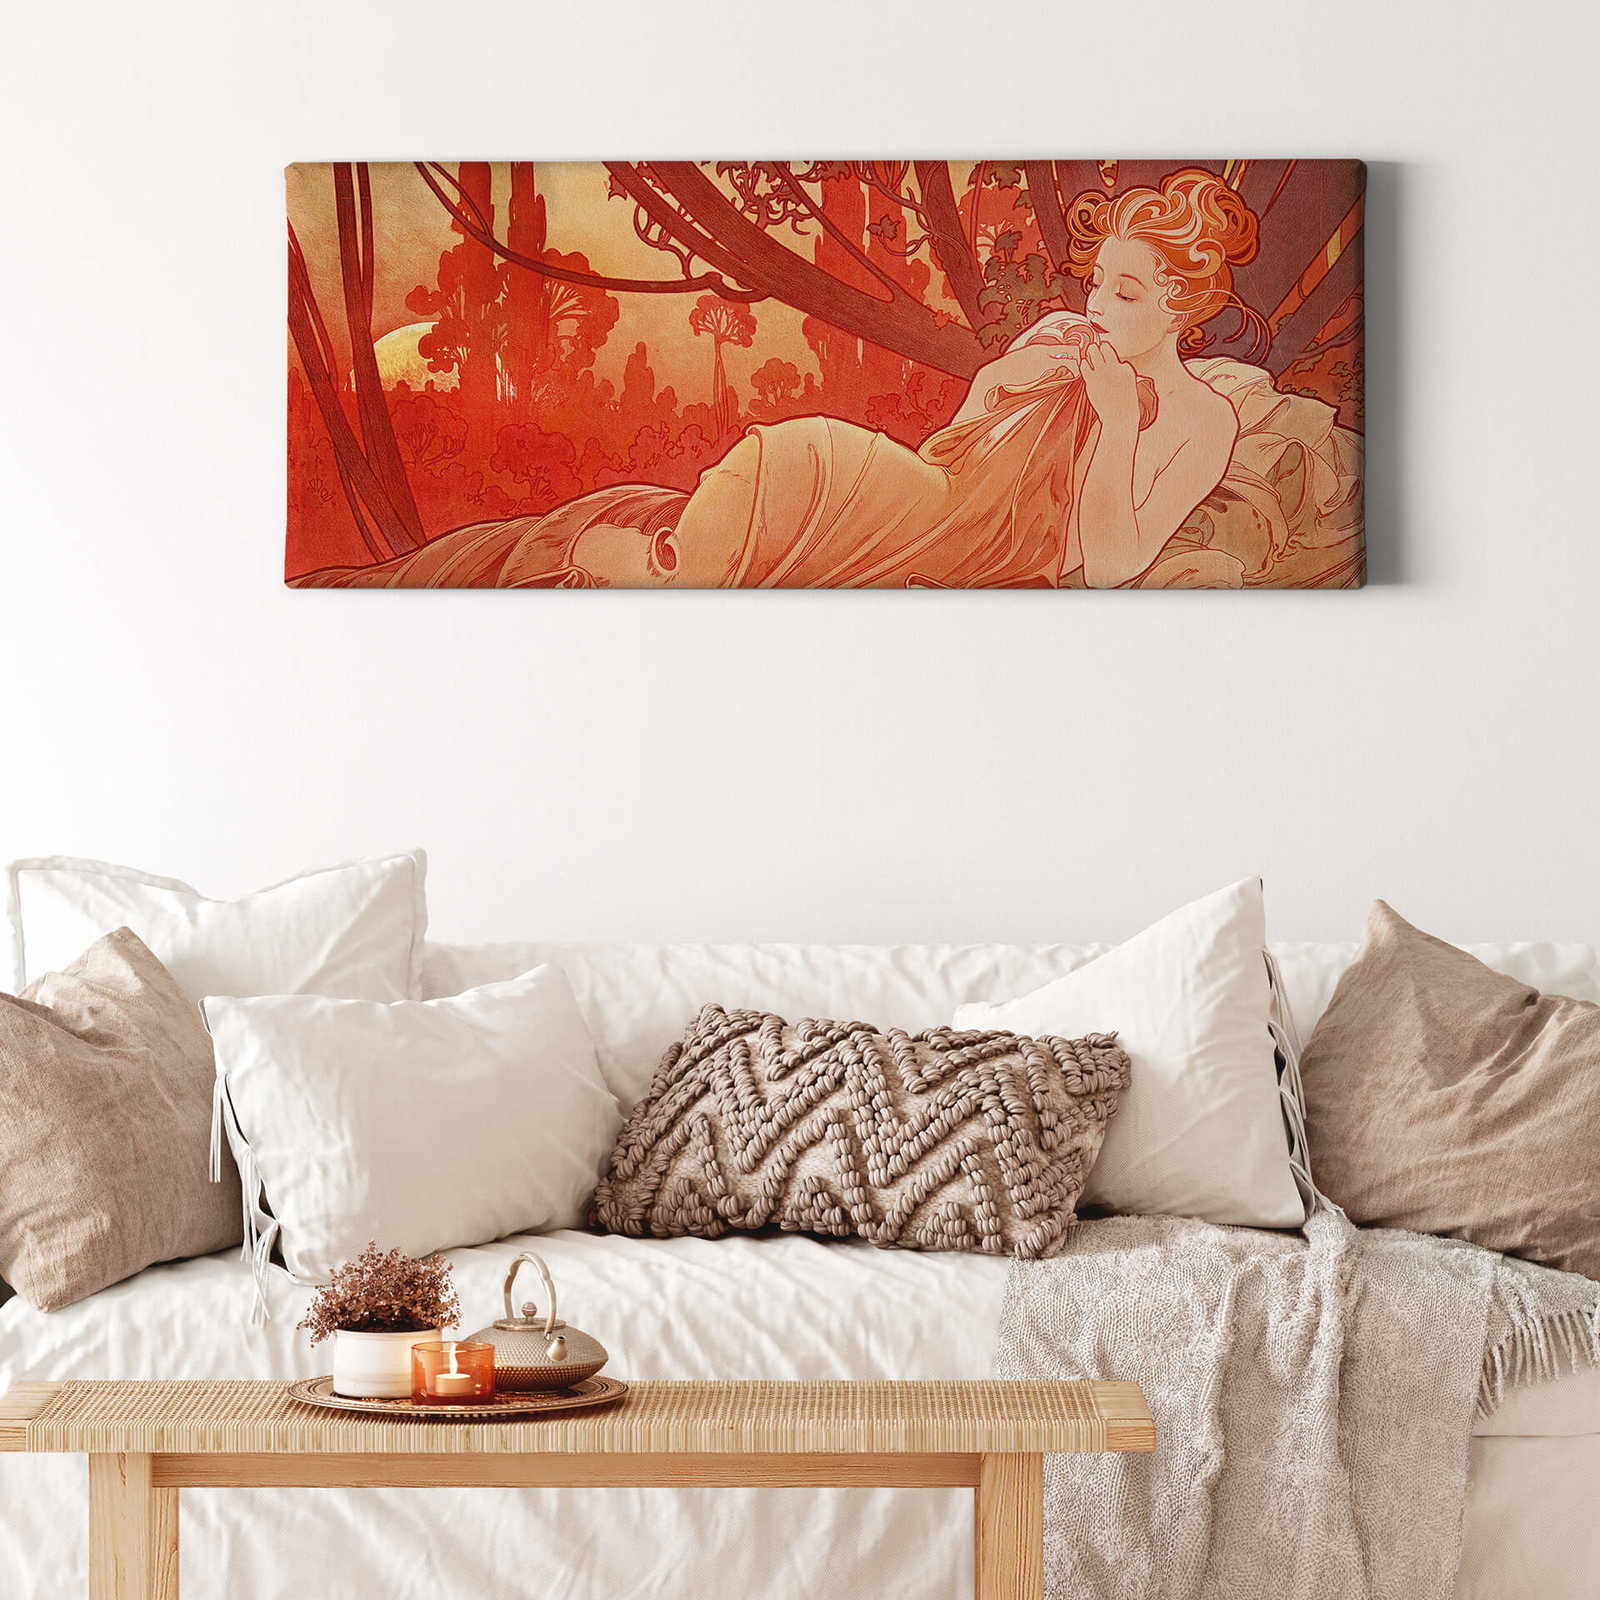             Panoramic canvas print by Mucha "Dusk"
        